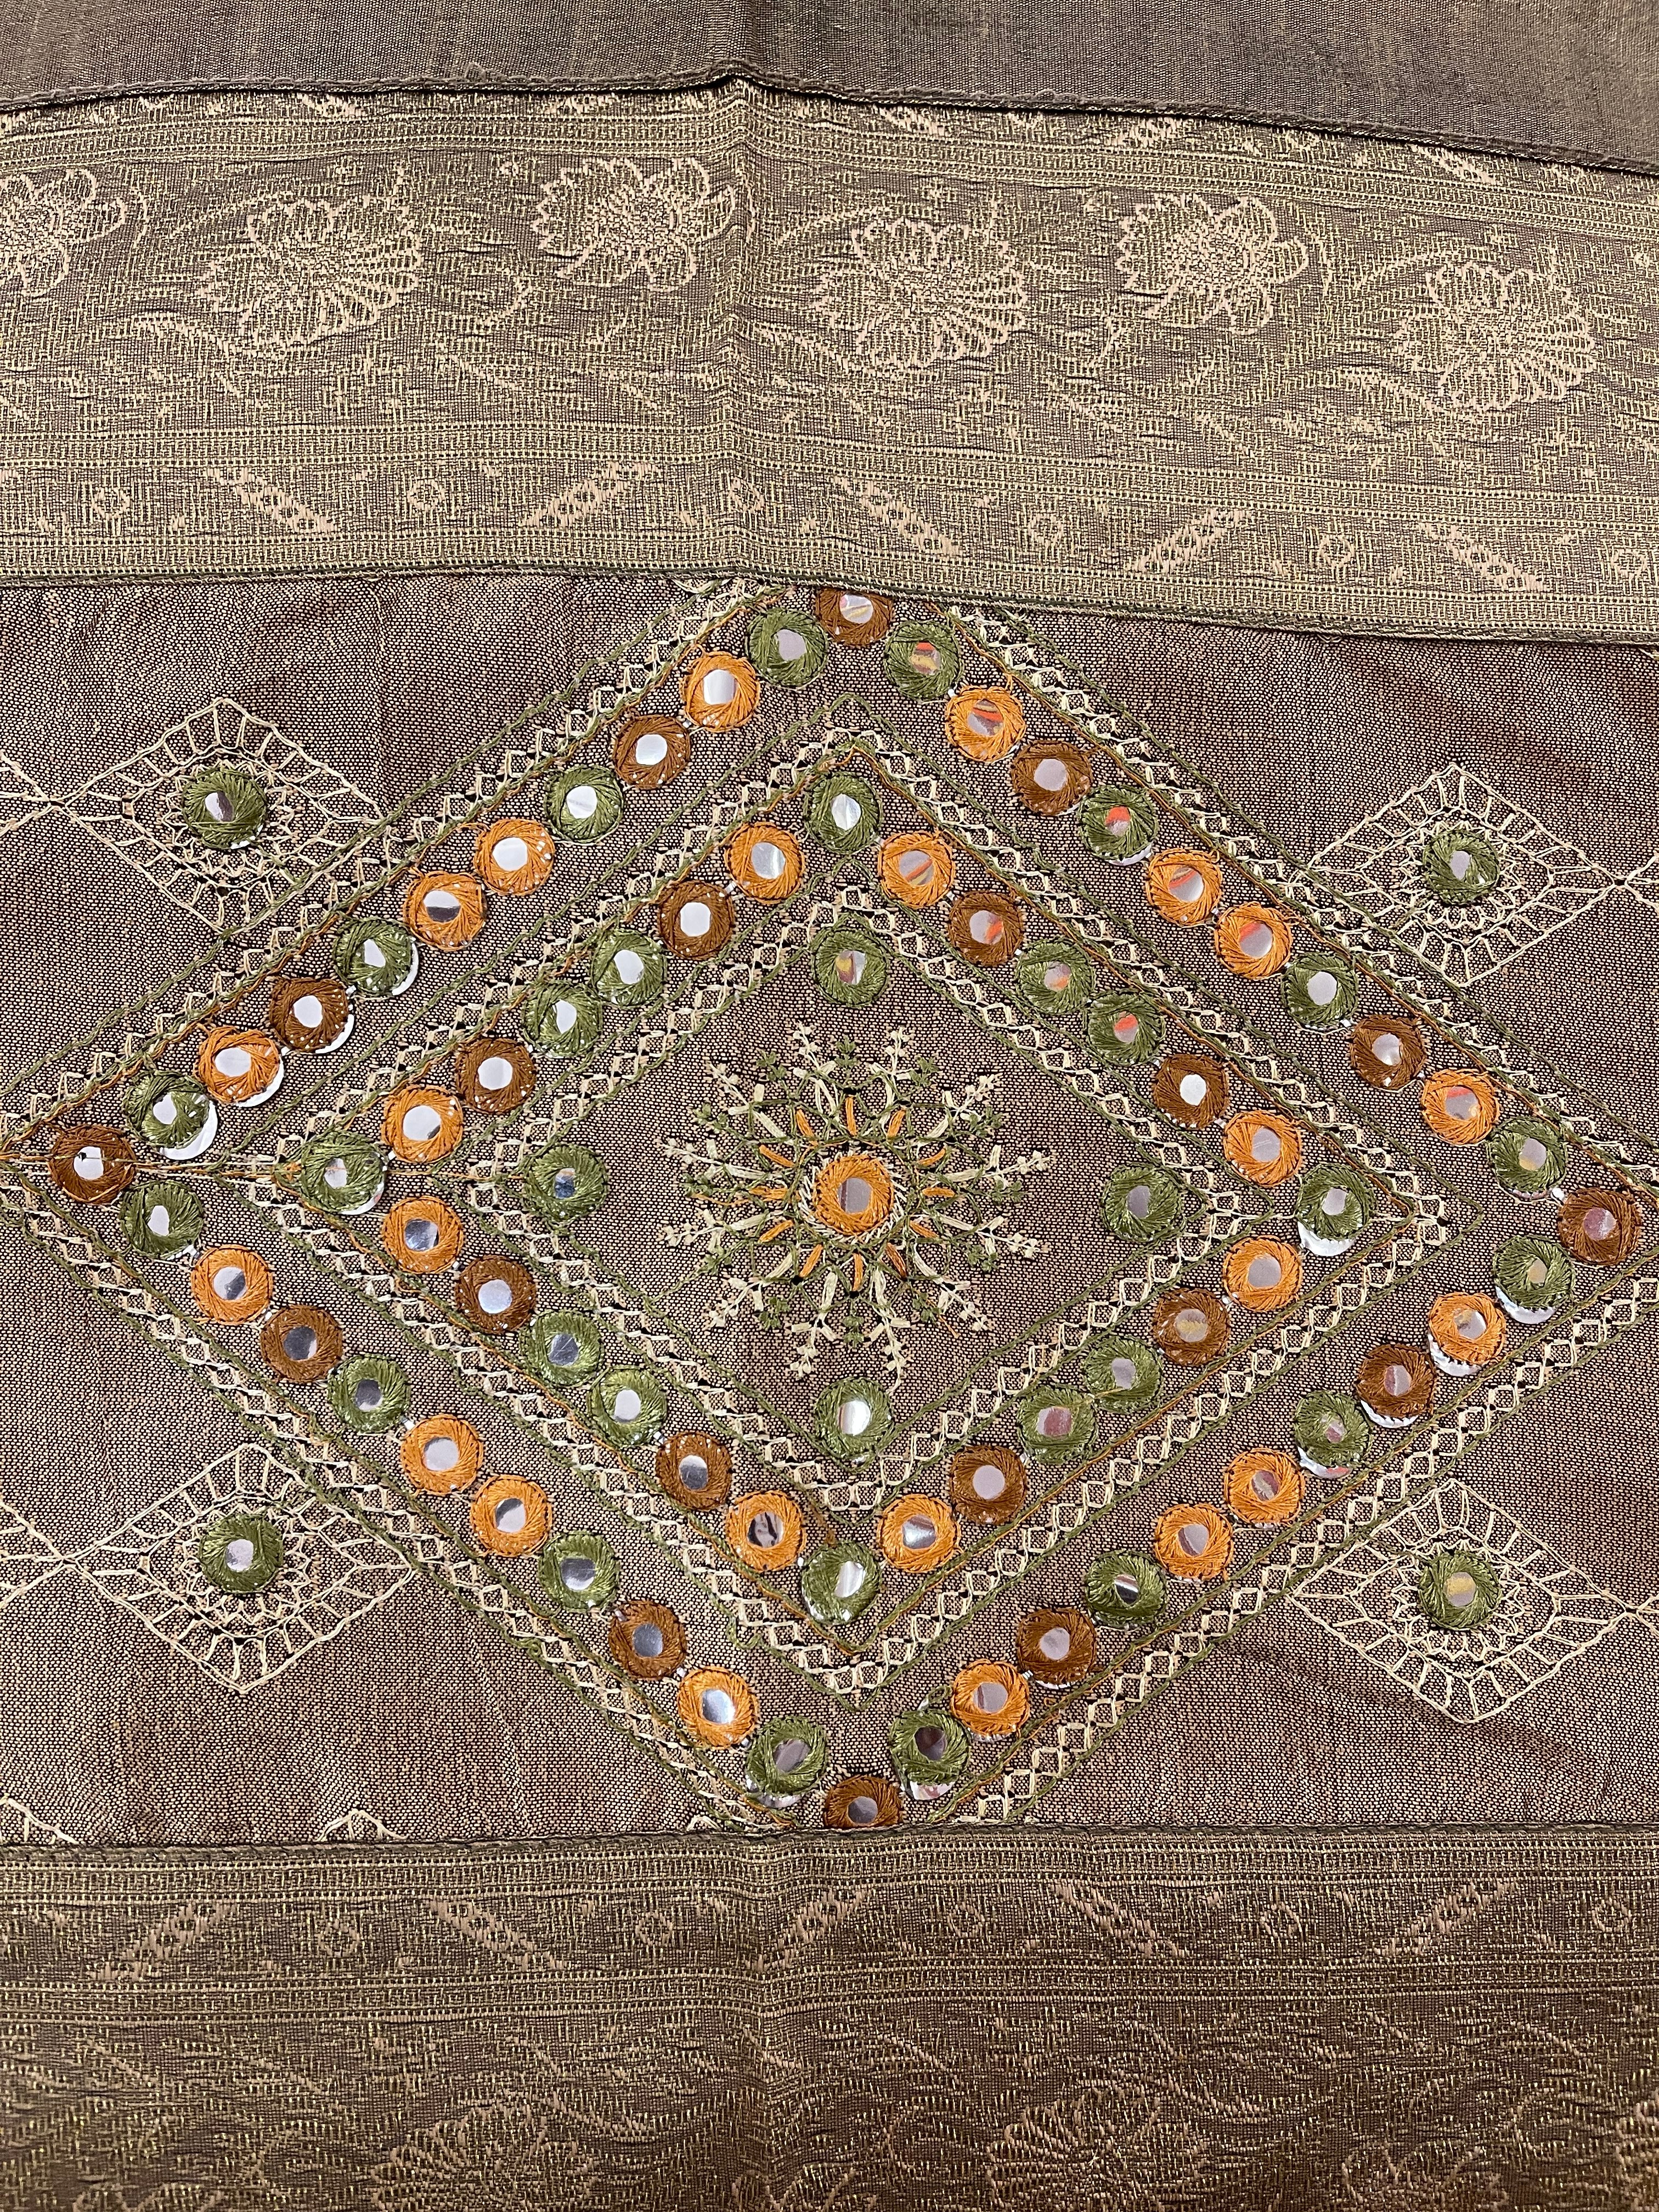 Gold Patchwork Pillow Cover - Vintage India NYC